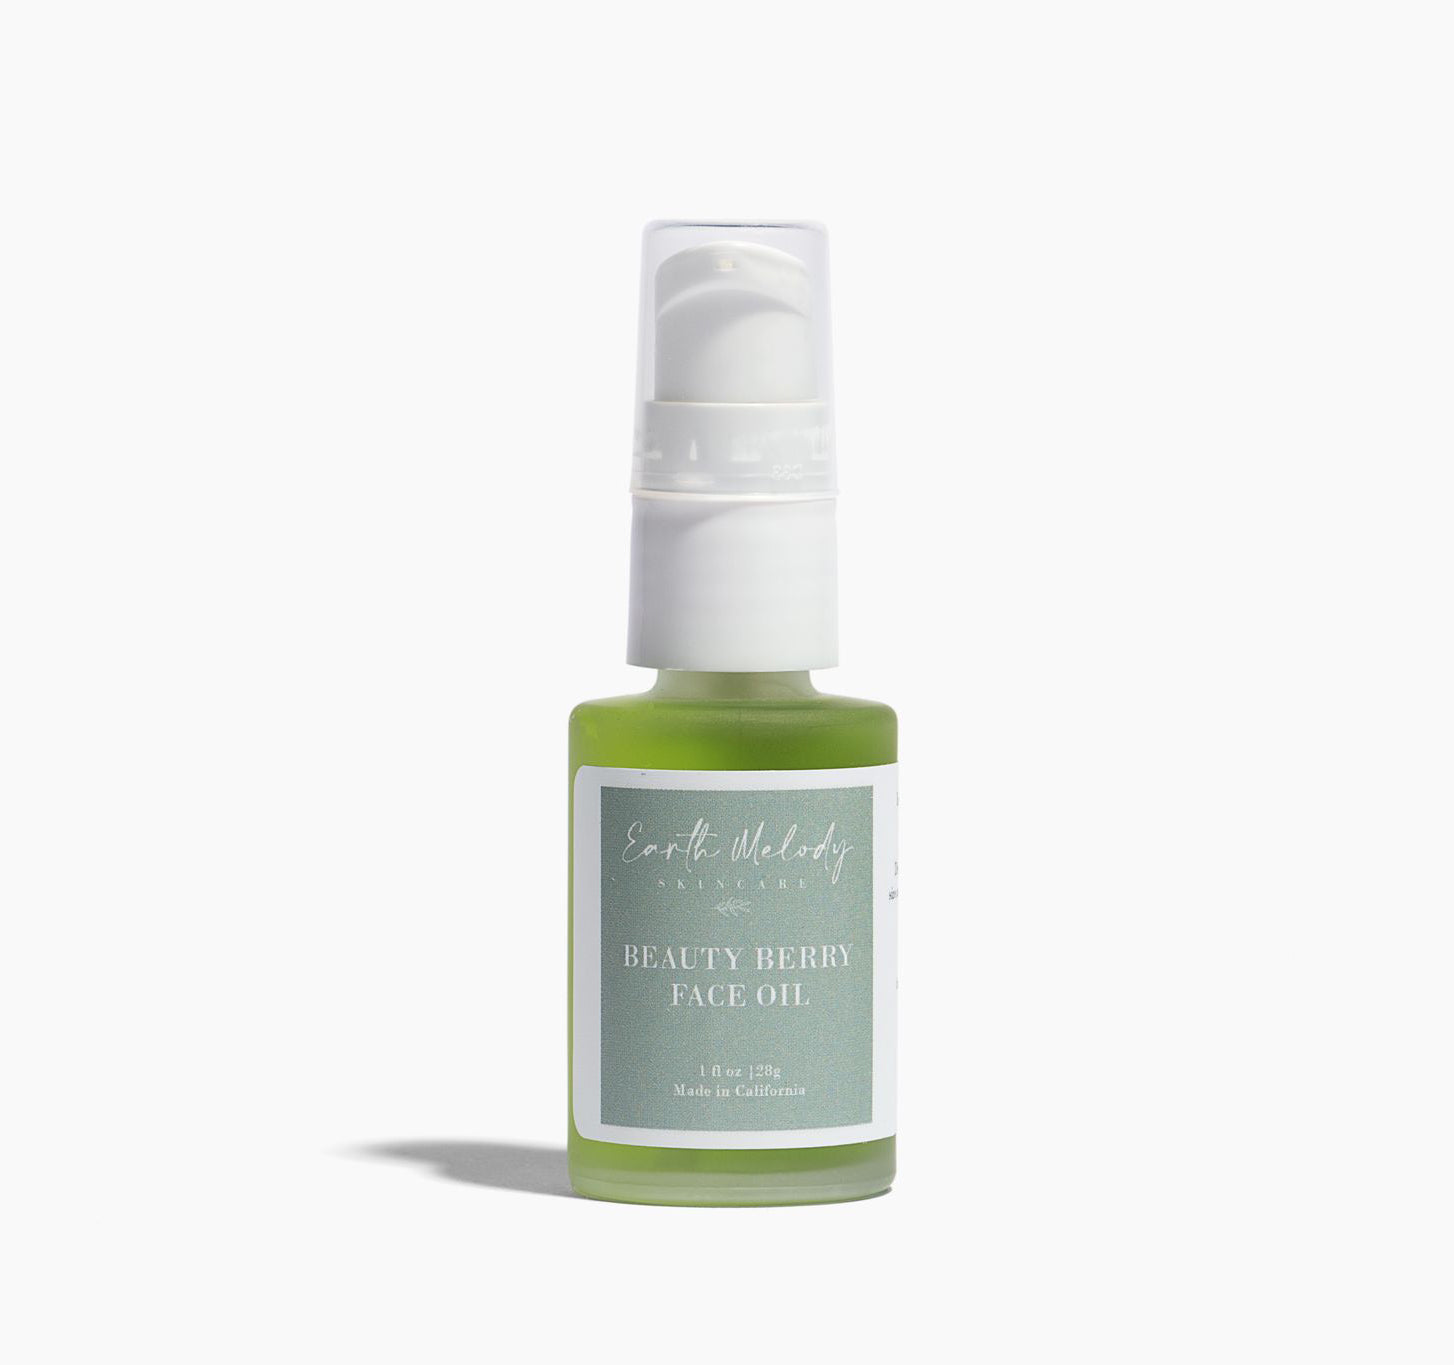 Blueberry seed oil face oil, beauty oil